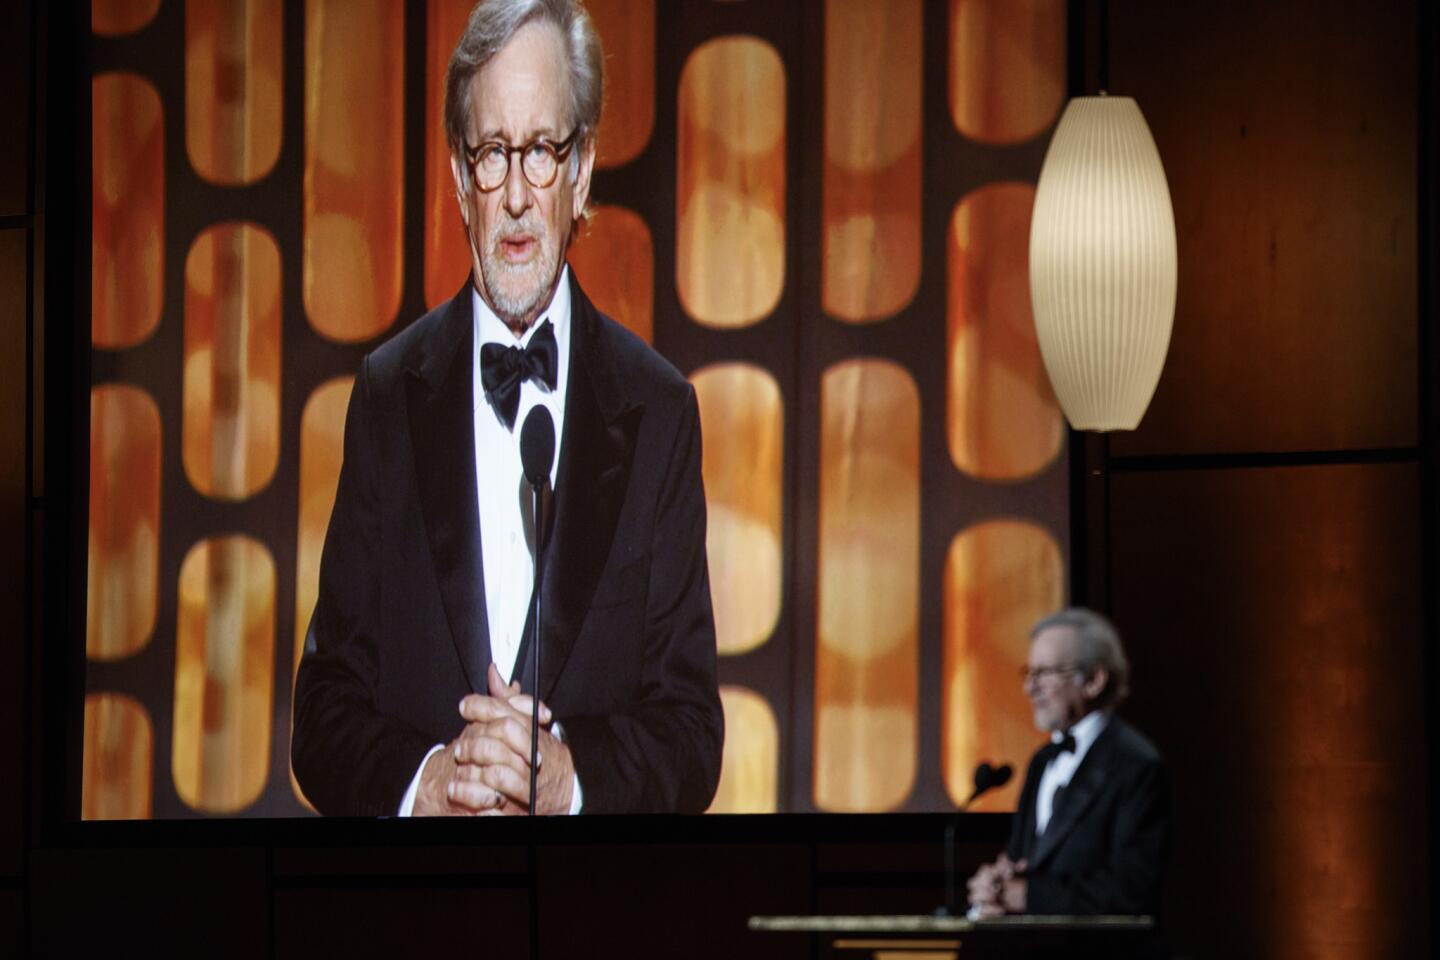 Director Steven Spielberg makes opening remarks at the Academy of Motion Picture Arts and Sciences' 9th Governors Awards at the Ray Dolby Ballroom at Hollywood & Highland Center.